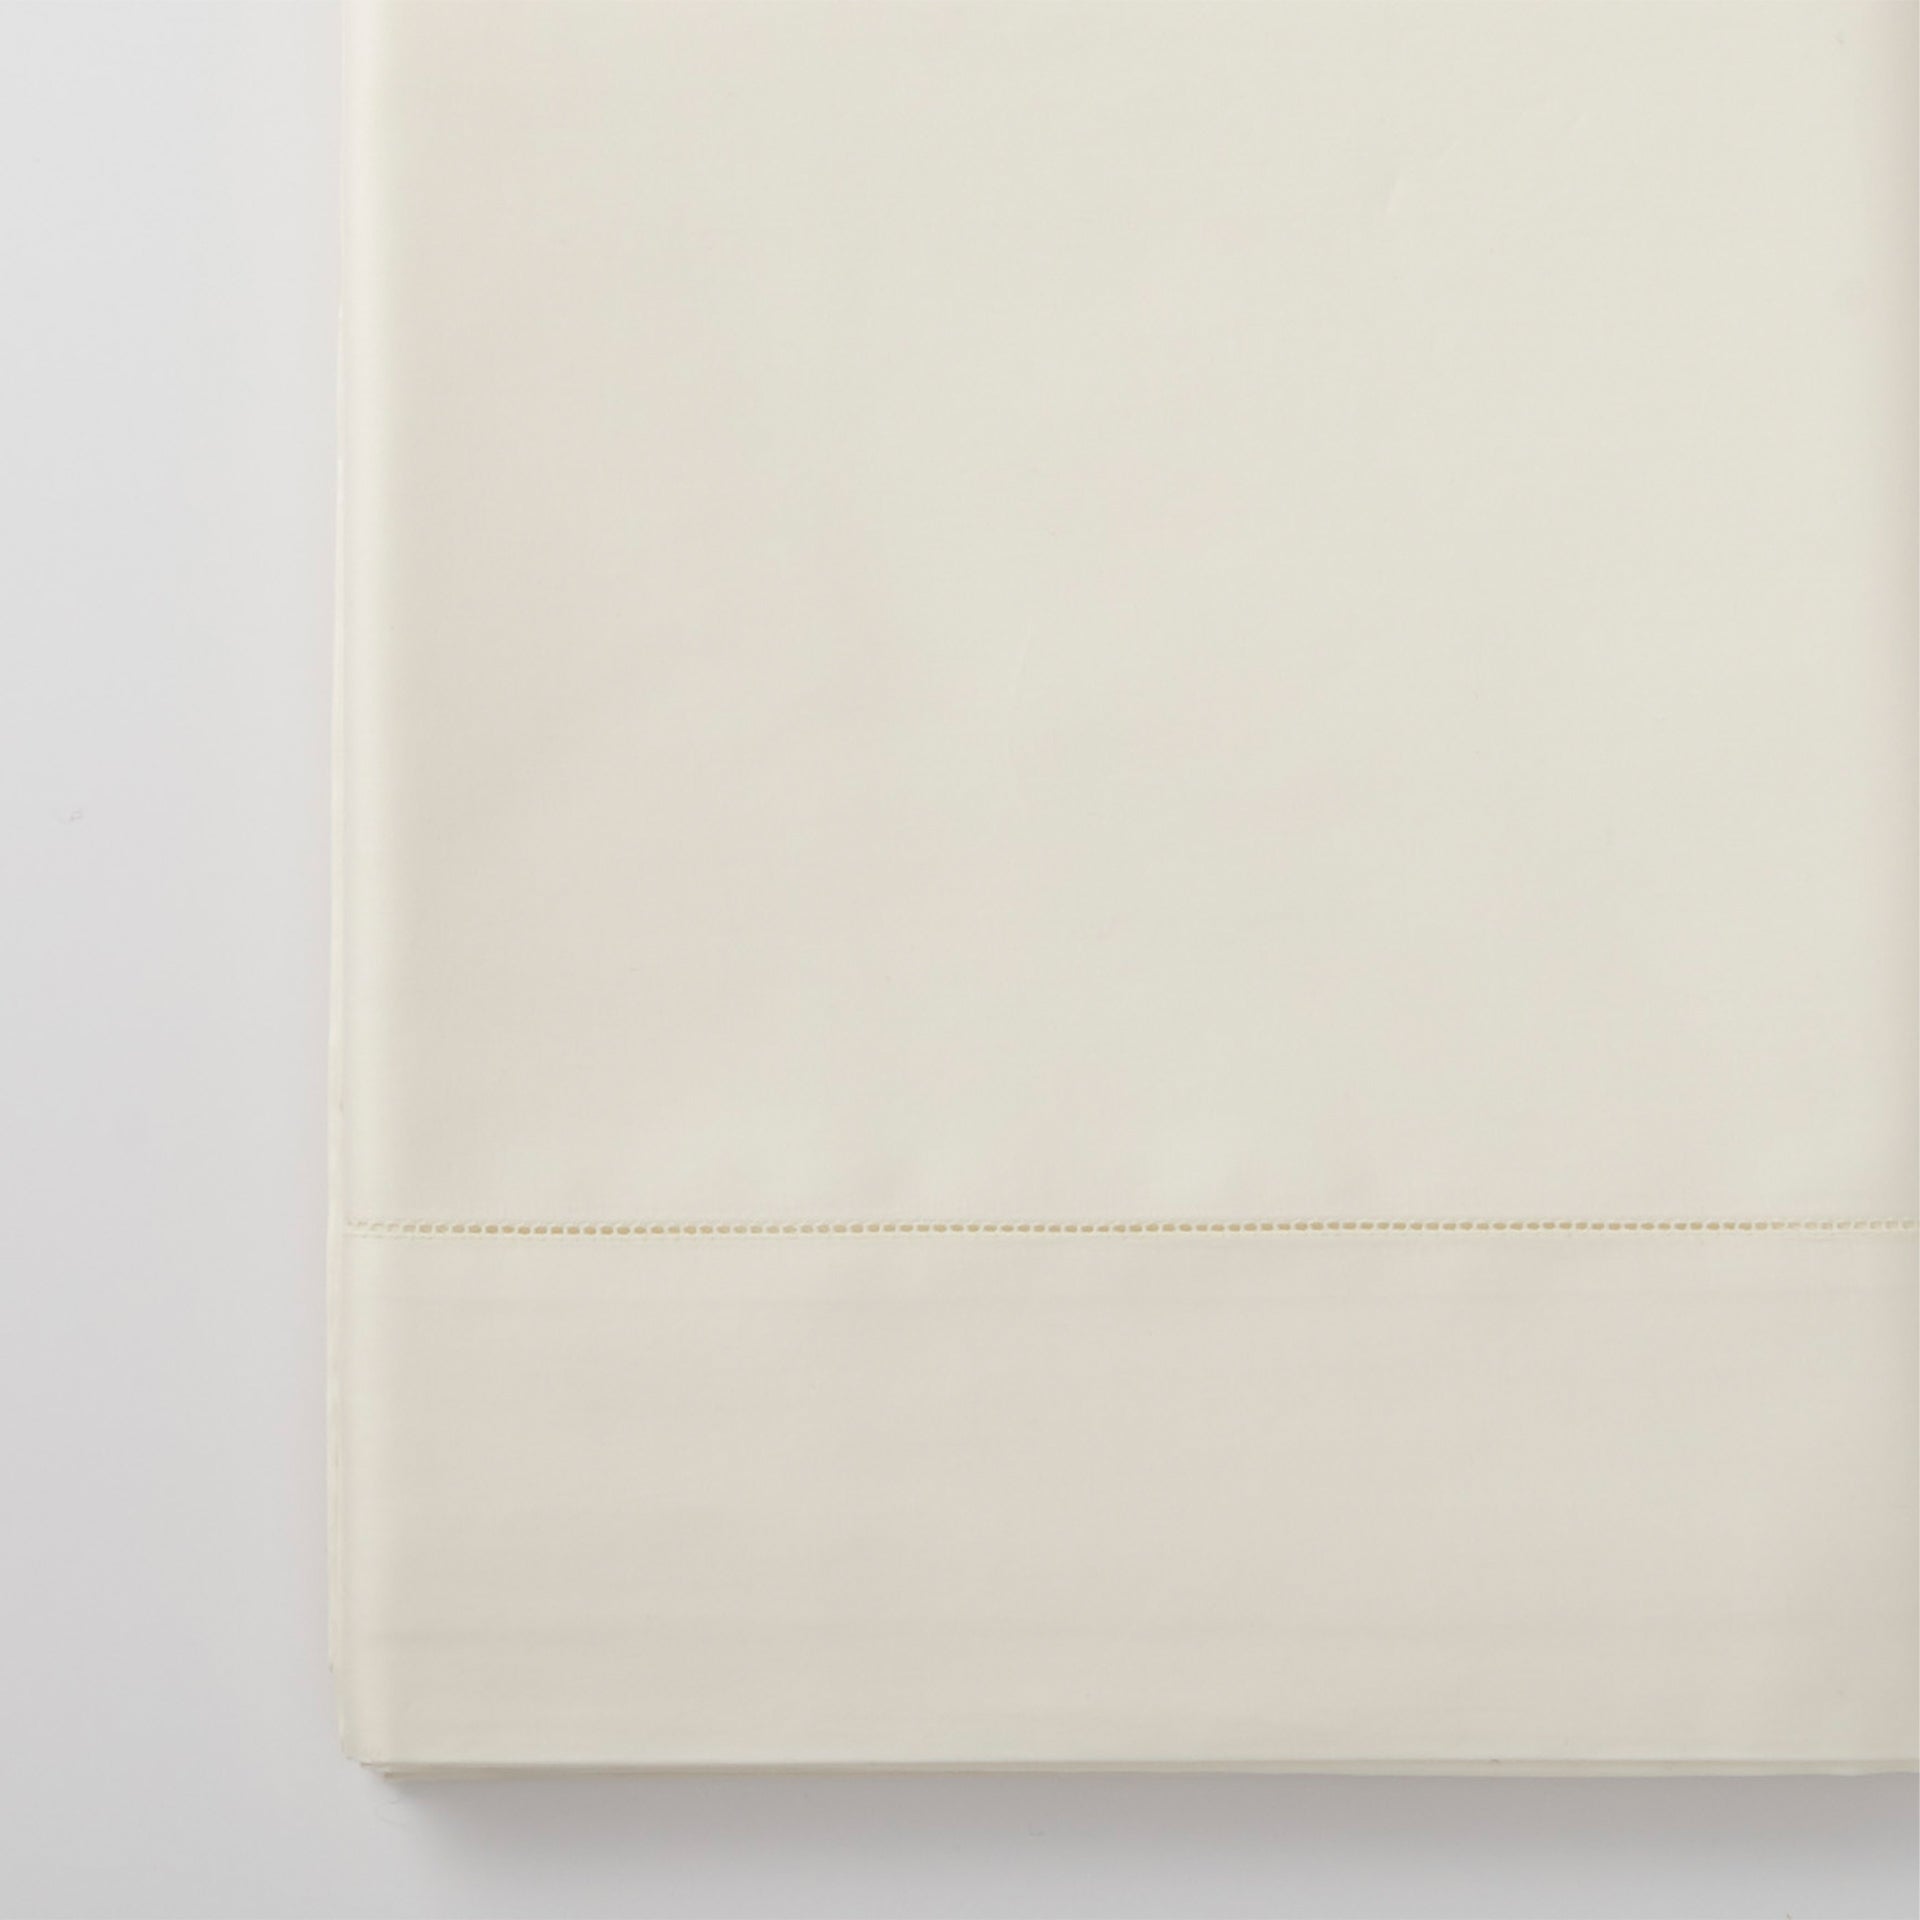 stresa sateen detail in the color ivory, 